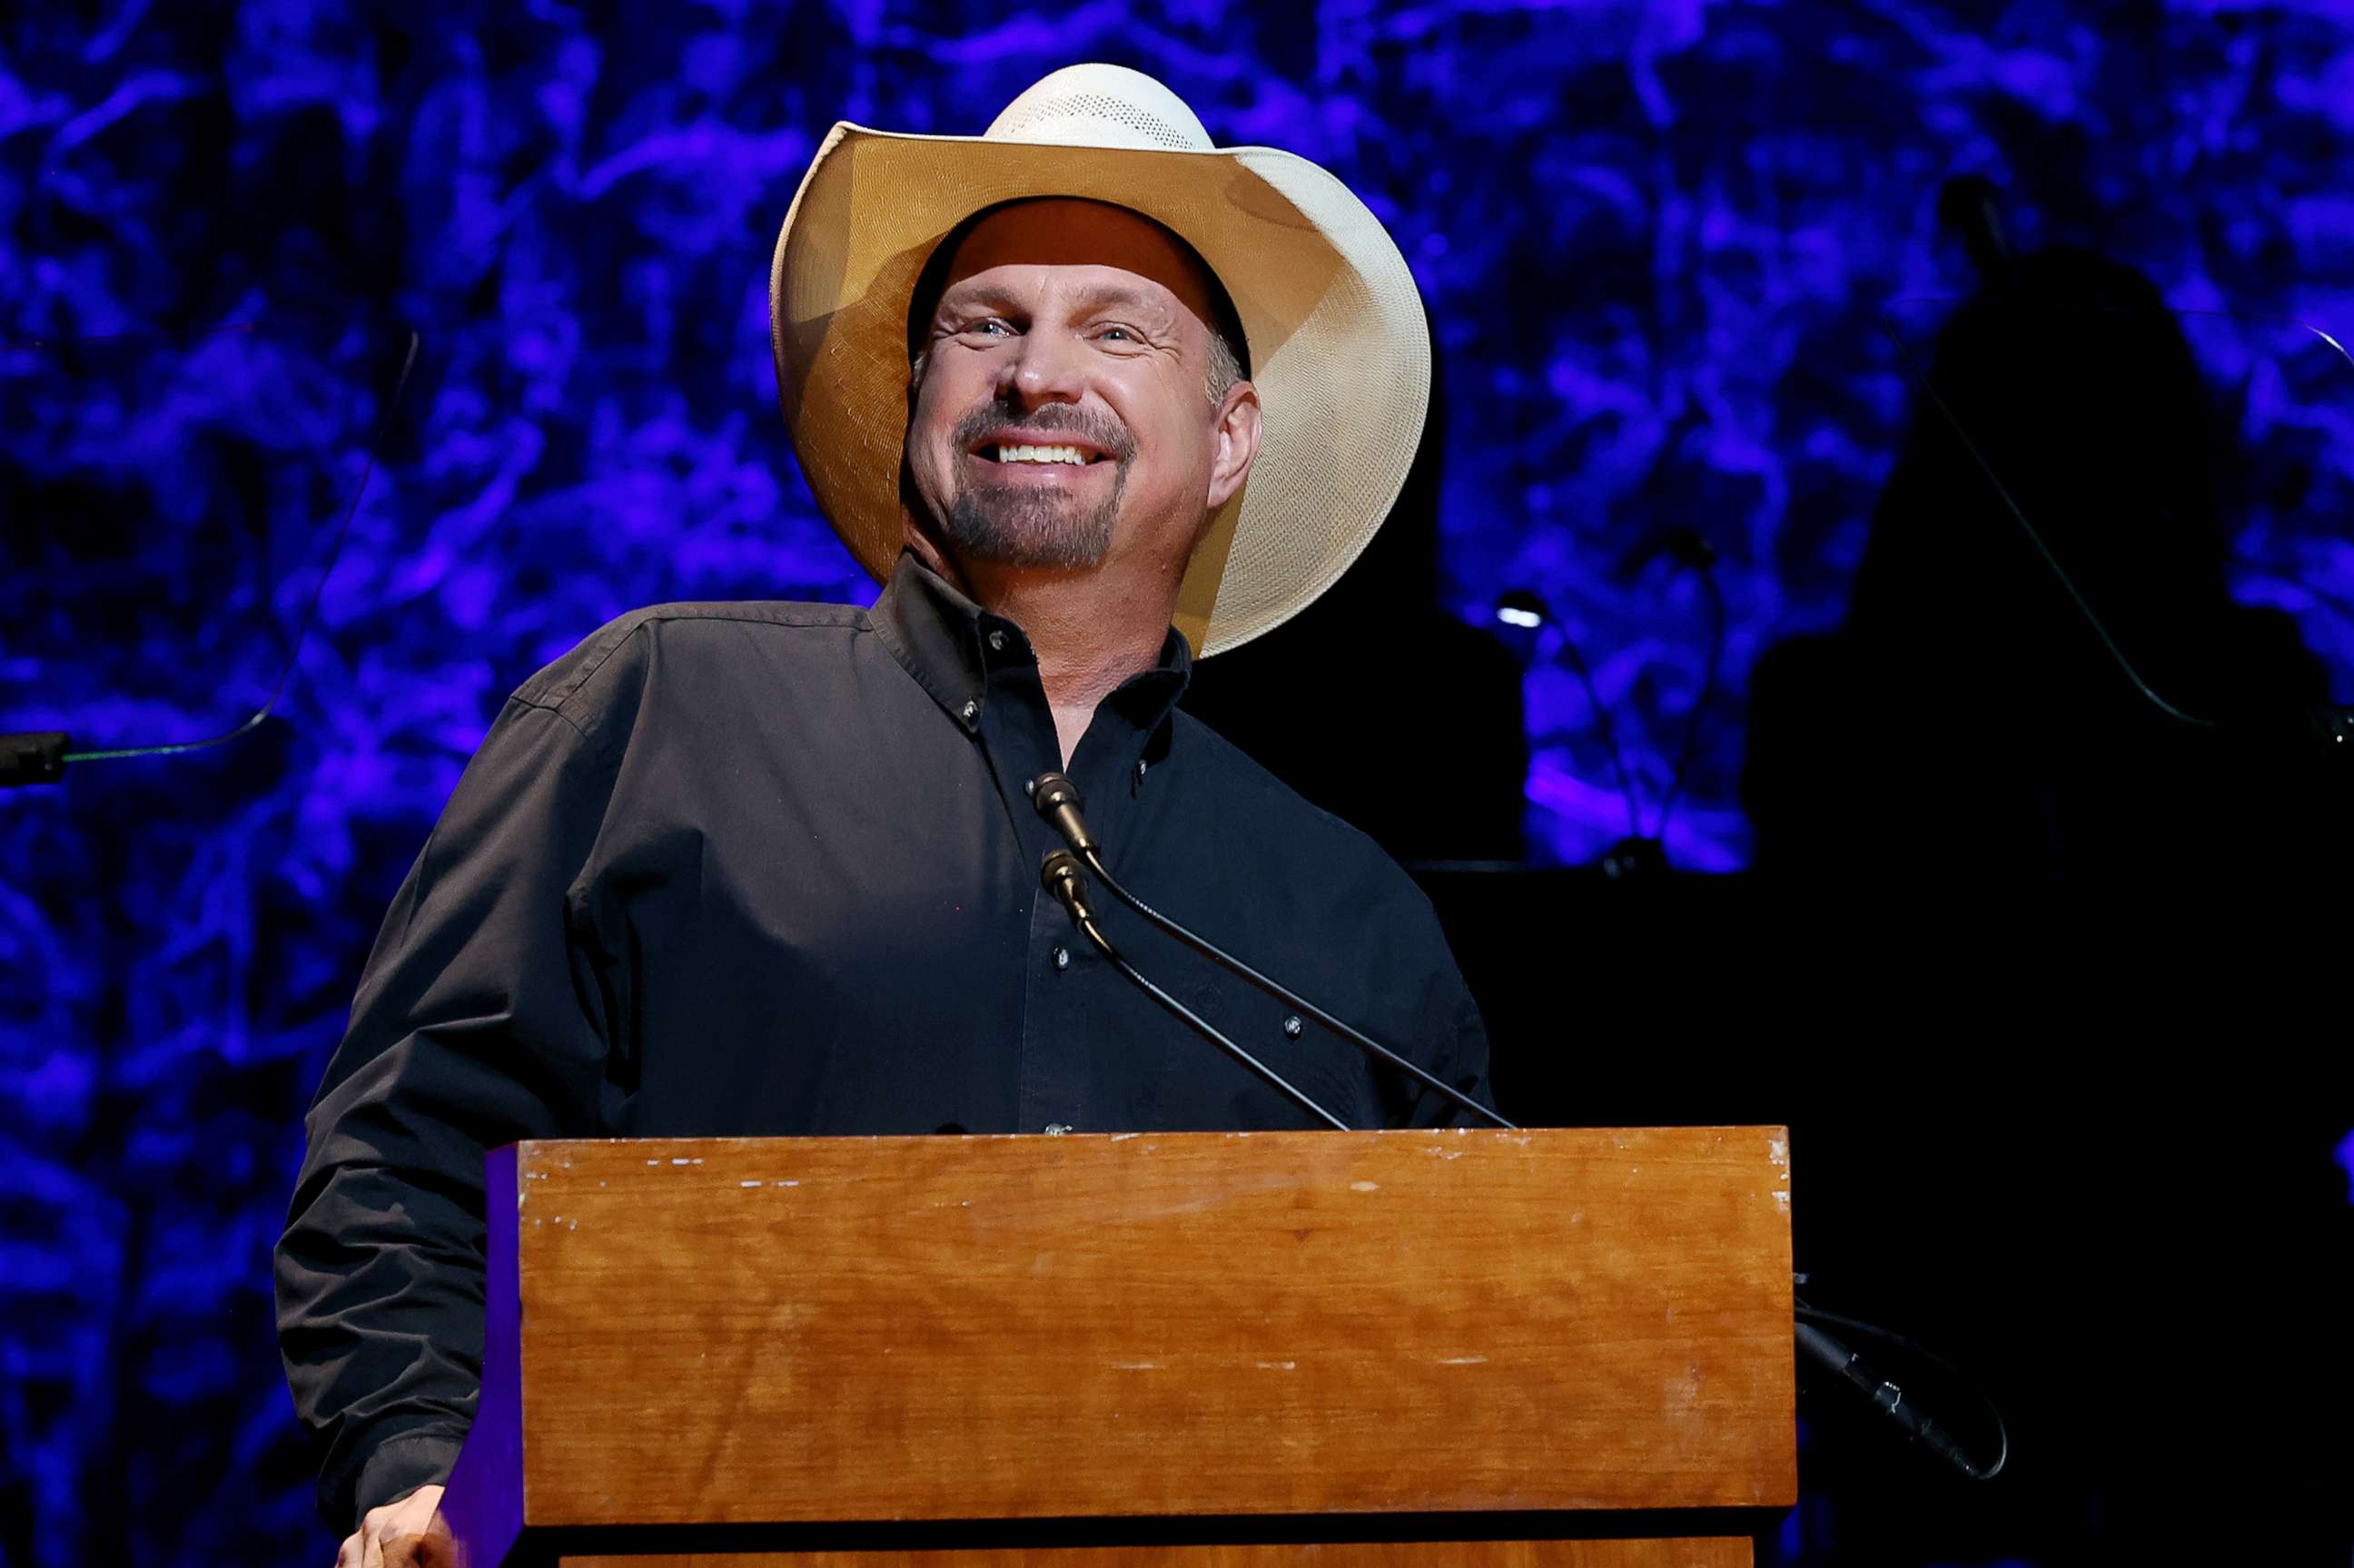 PHOTO: In this Oct. 16, 2022, file photo, Garth Brooks speaks at the class of 2022 Medallion Ceremony at Country Music Hall of Fame and Museum, in Nashville, Tenn.